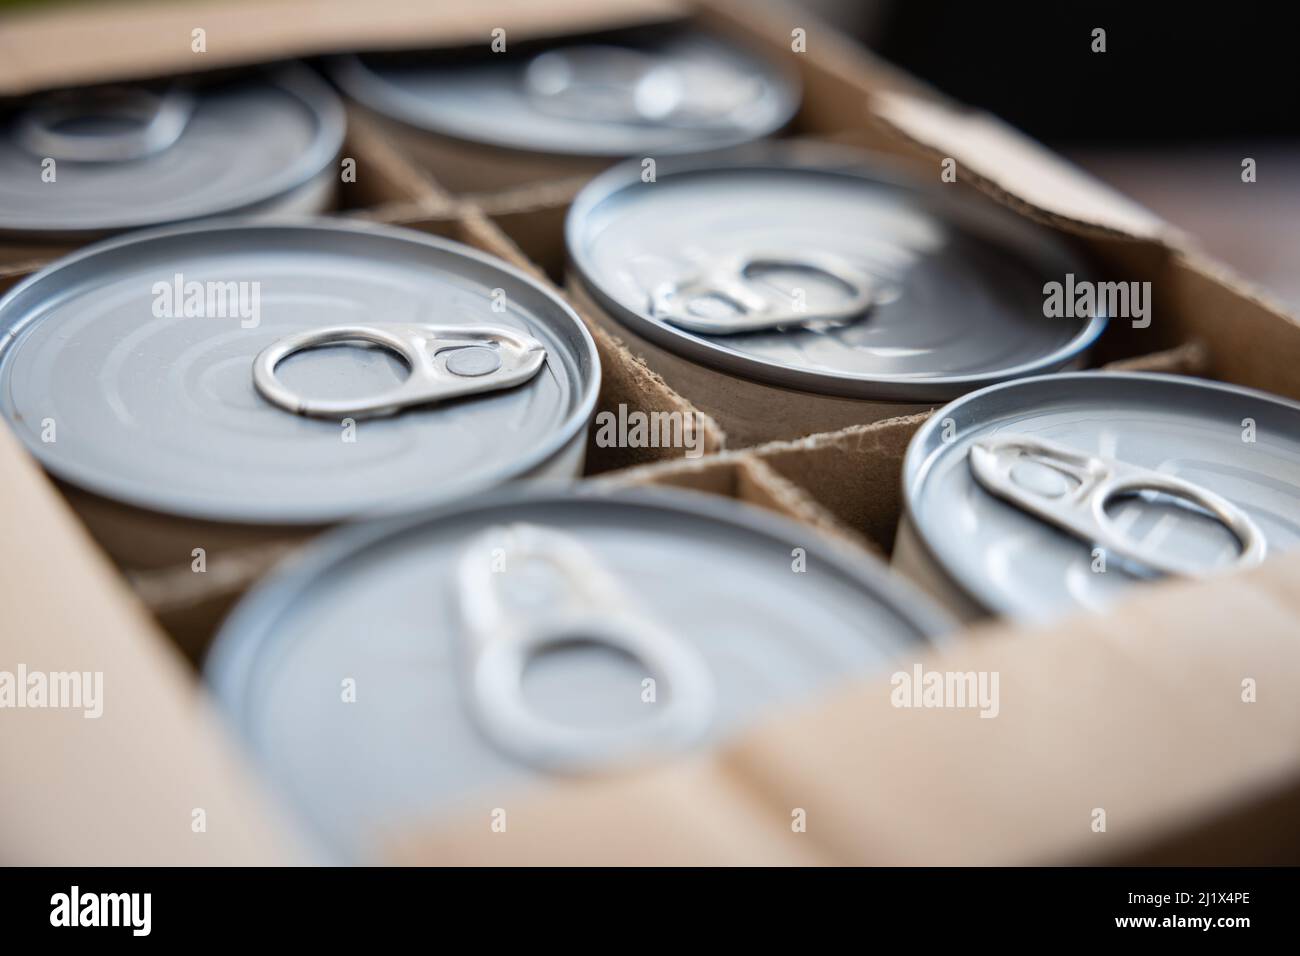 Food cans in an open cardboard box. Concept image for supply chain disruption, food shortage, stockpiling in times of war. Selective focus. Stock Photo